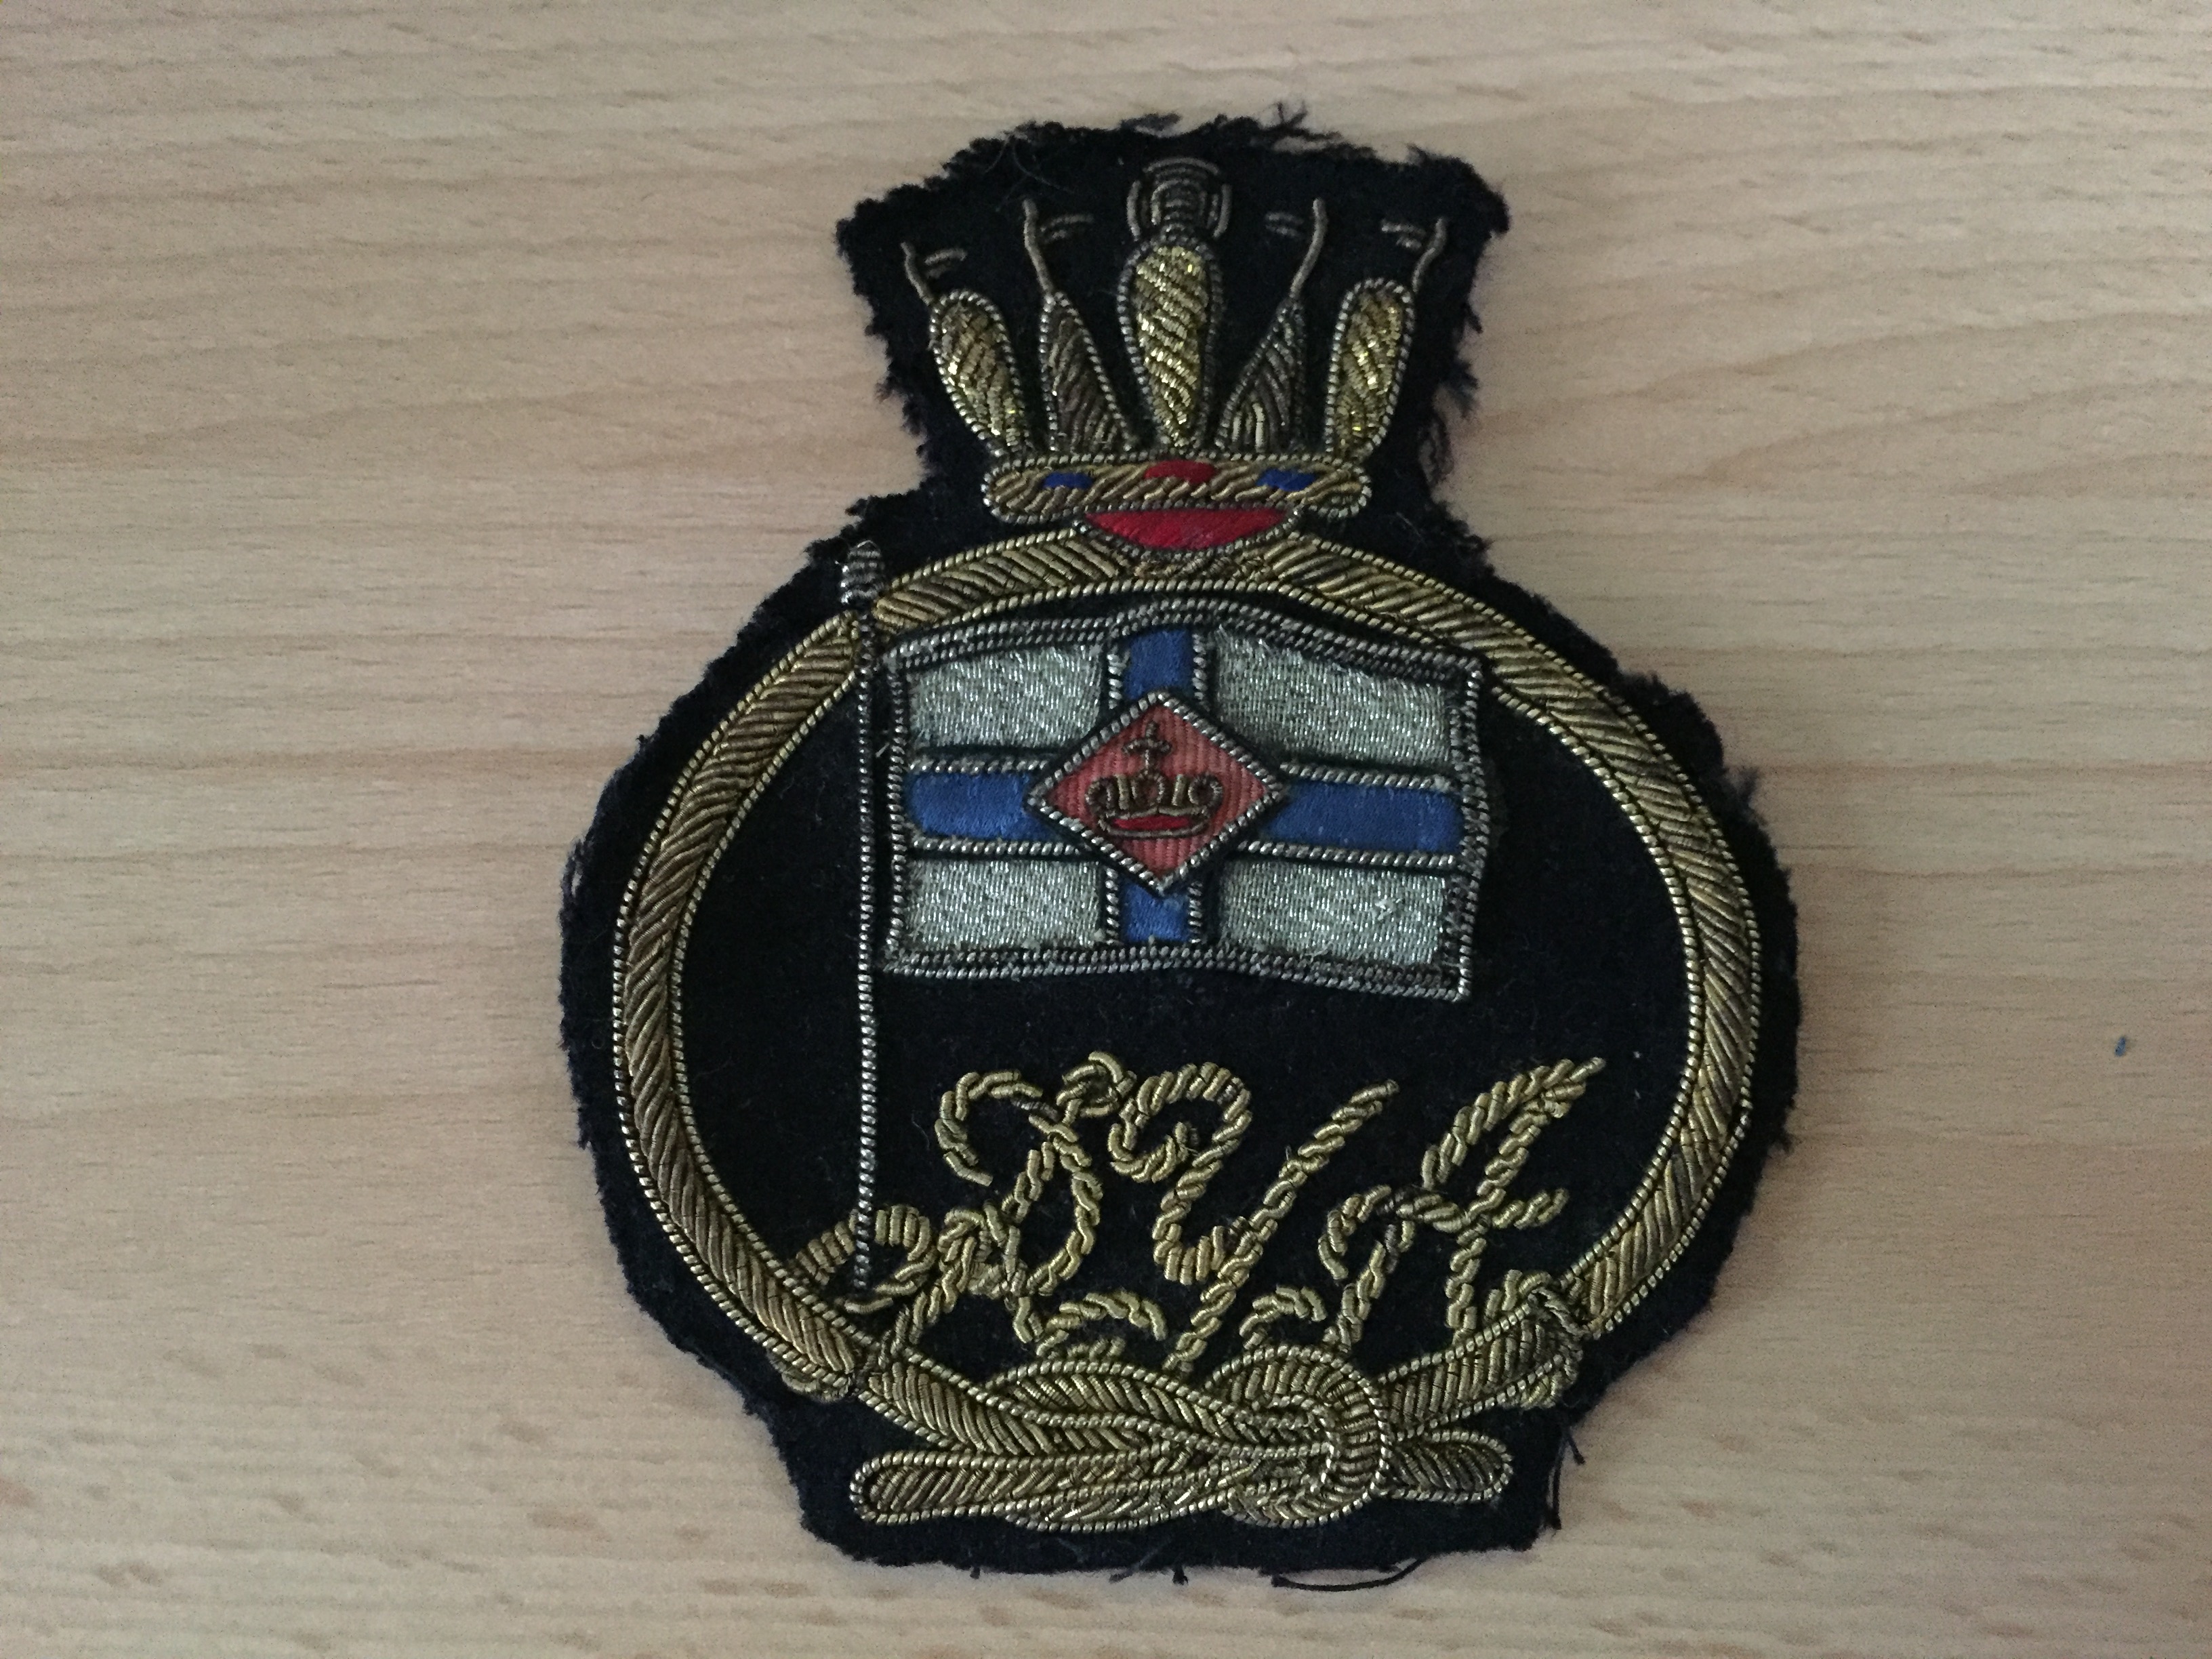 VERY EARLY TYPE OFFICERS BADGE FROM THE ROYAL YACHT ASSOCIATION 